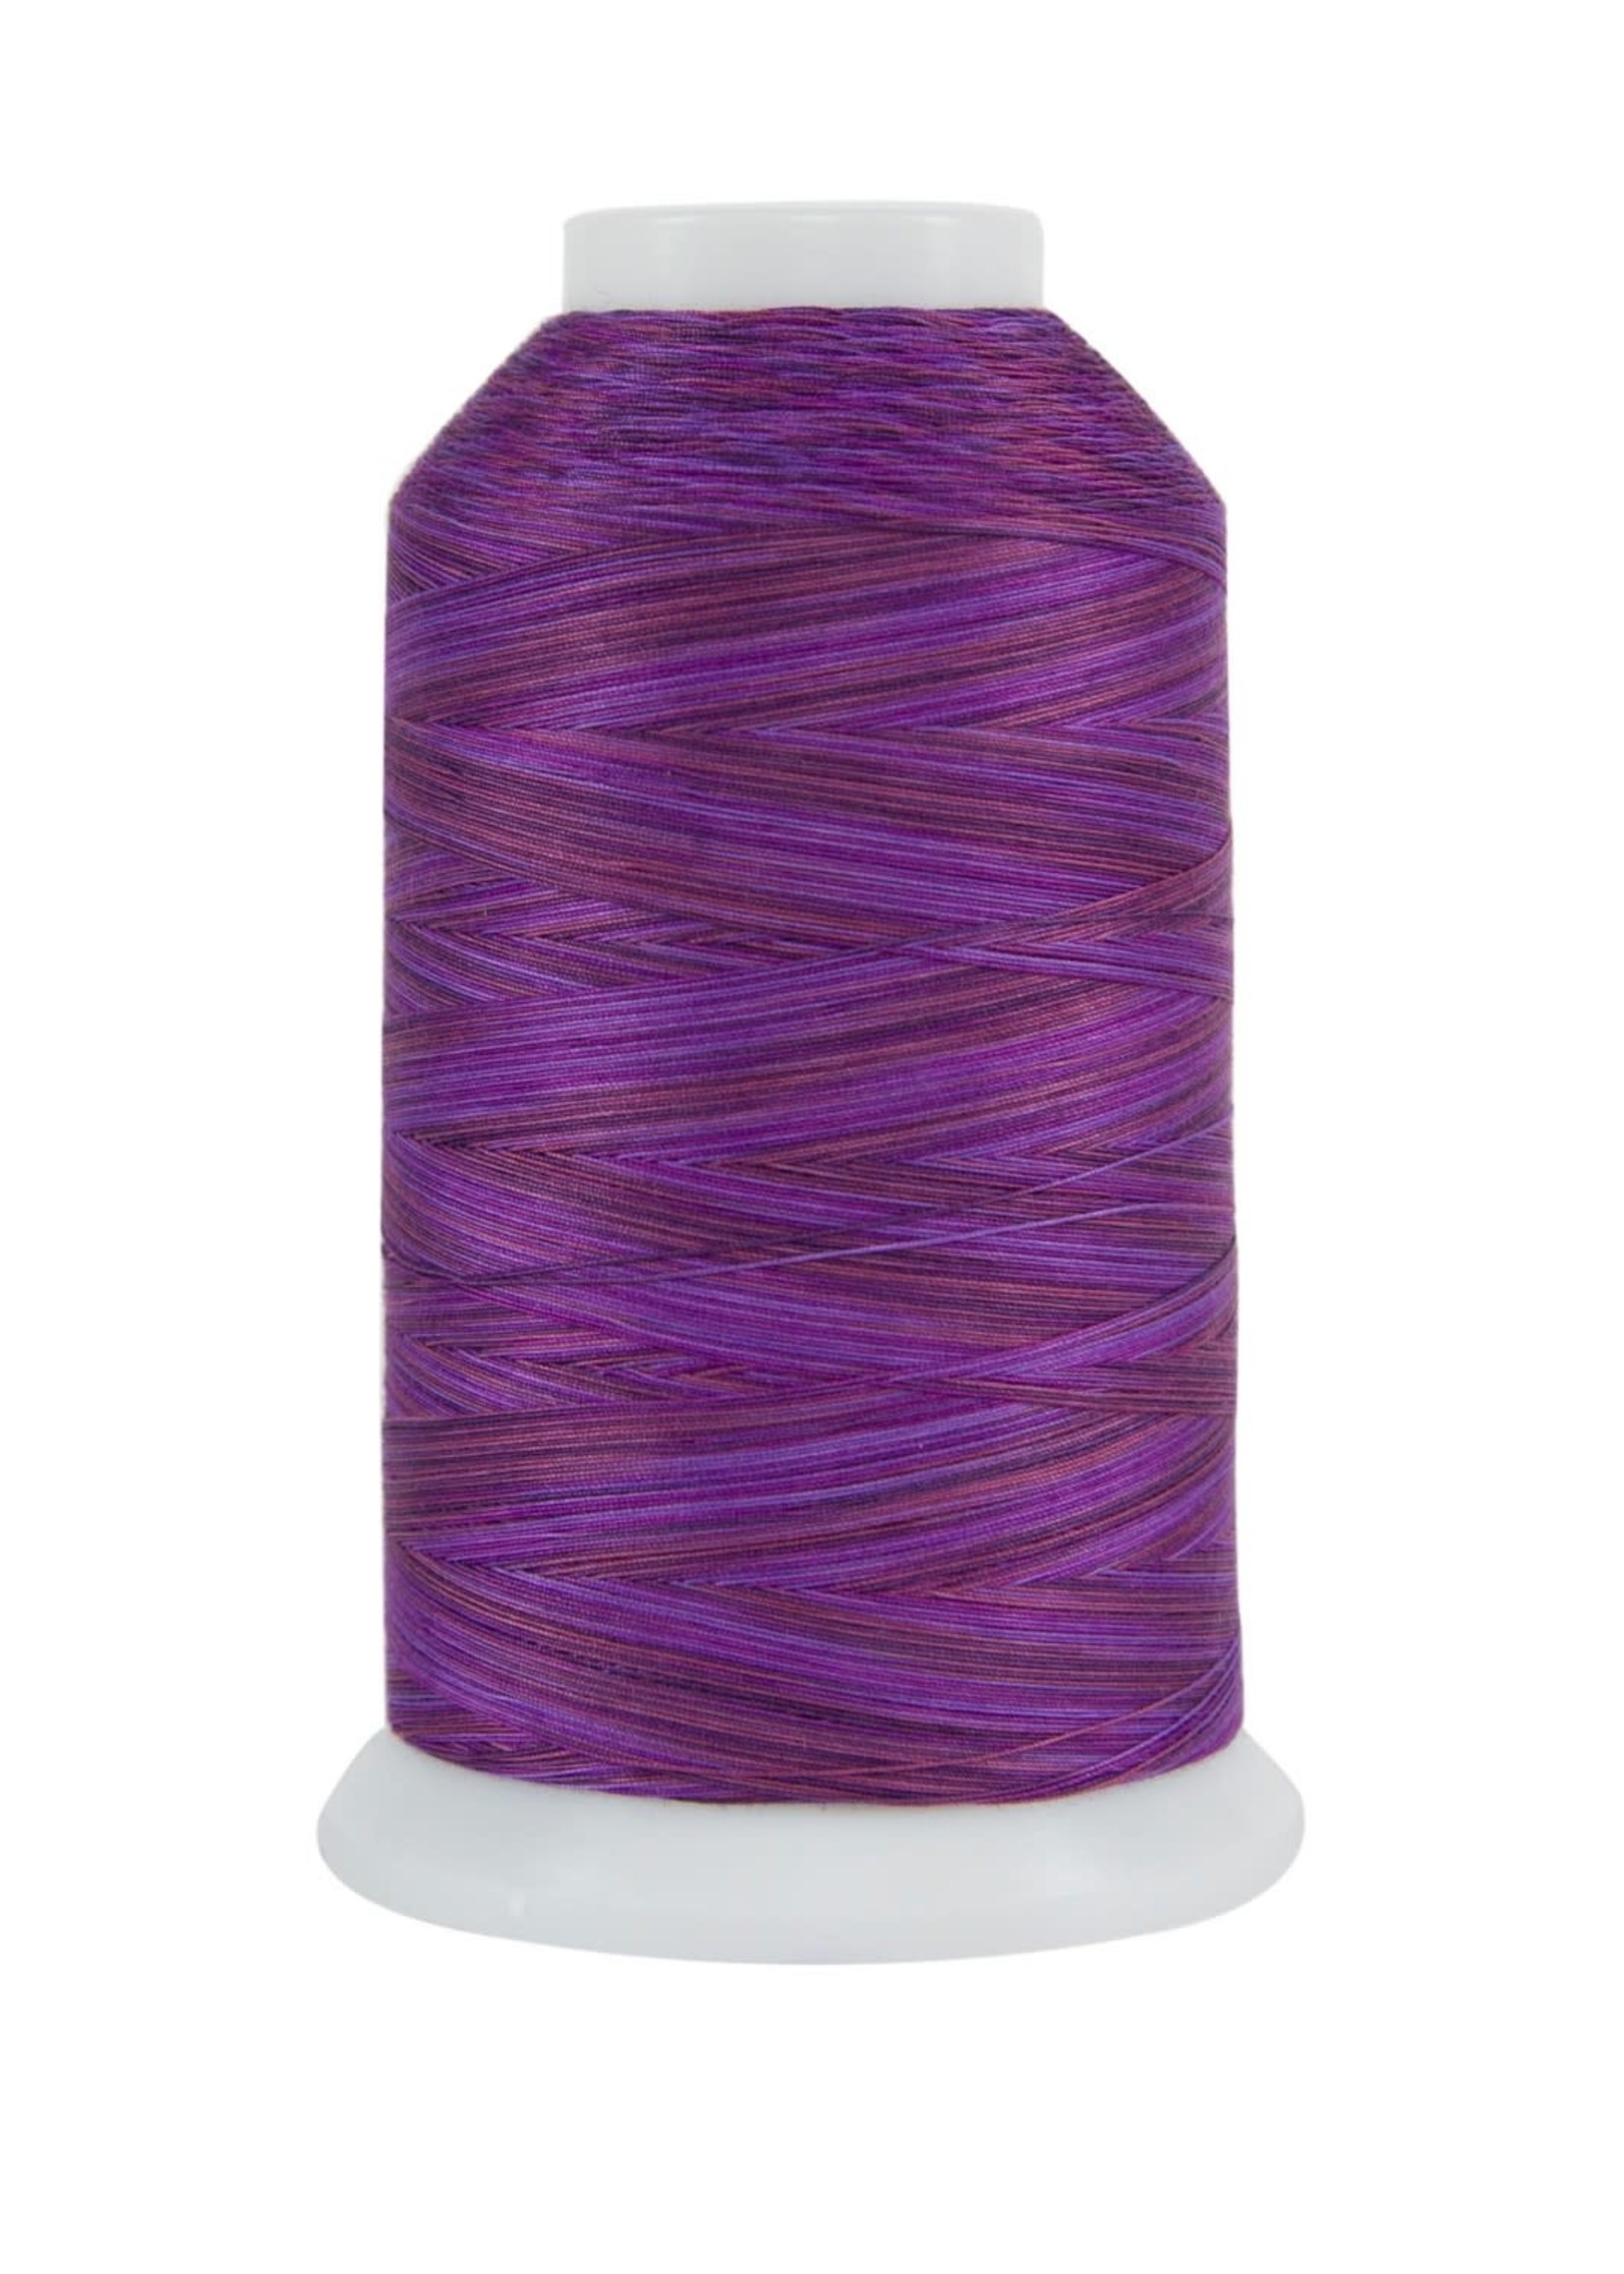 Superior Threads King Tut - #40 - 1828 m - 0948 Crushed Grapes